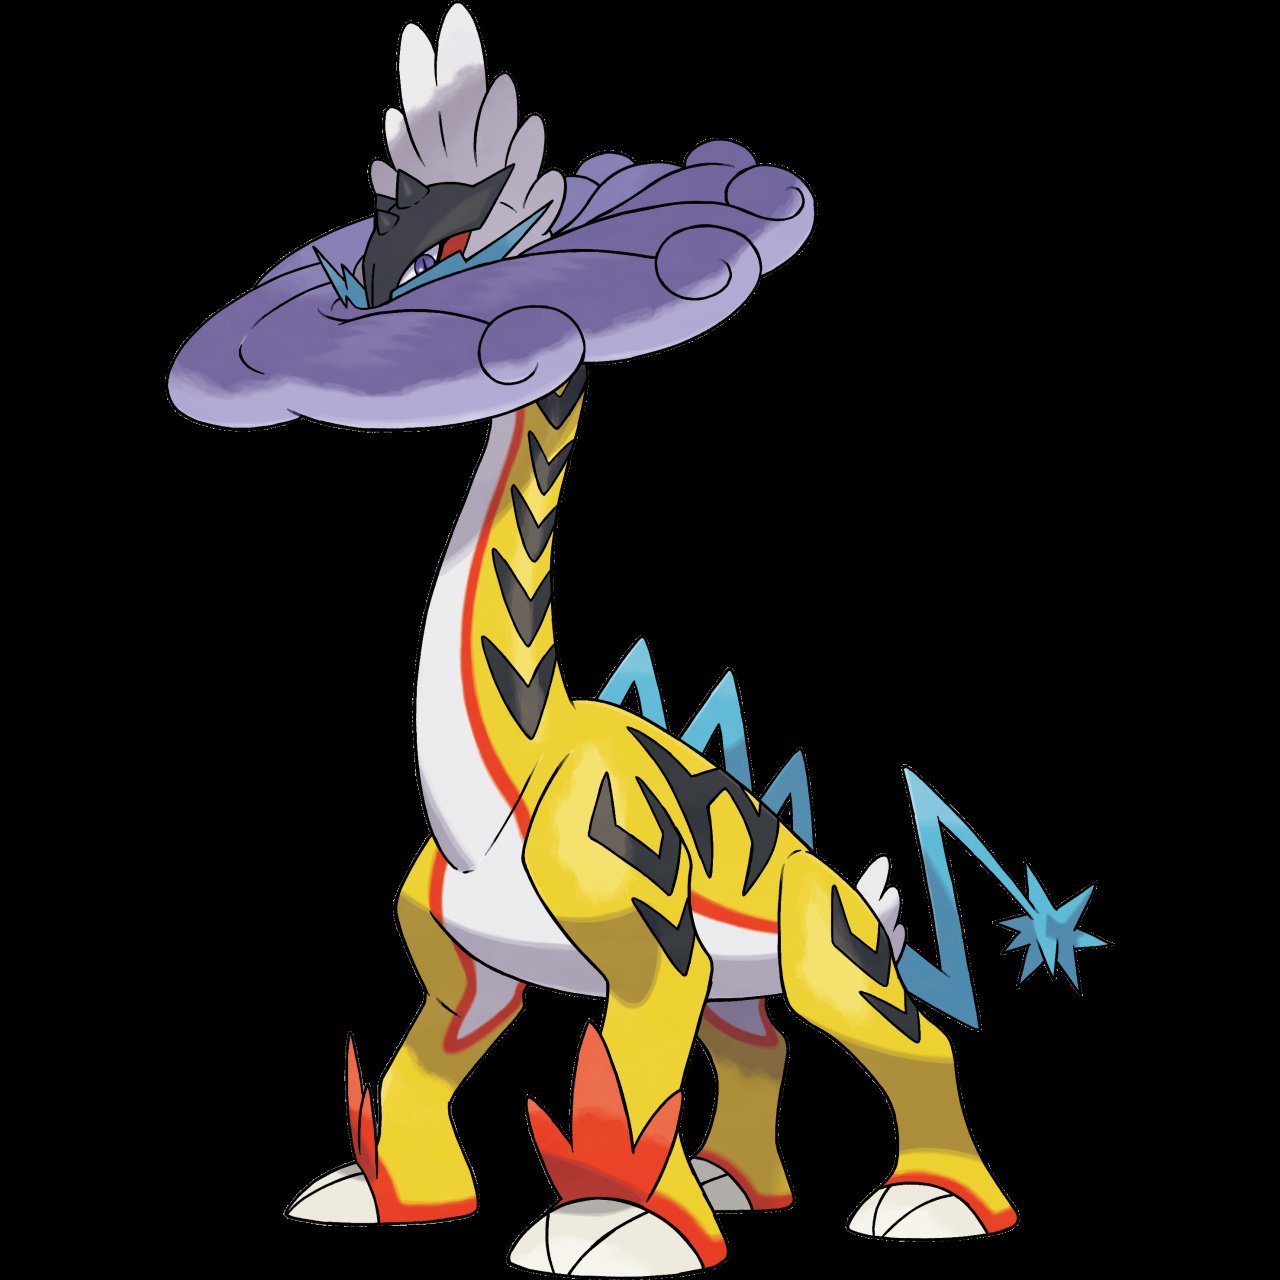 Cobalion and Raikou's Paradox Forms Could Hint at Two Future Pokemon Trios